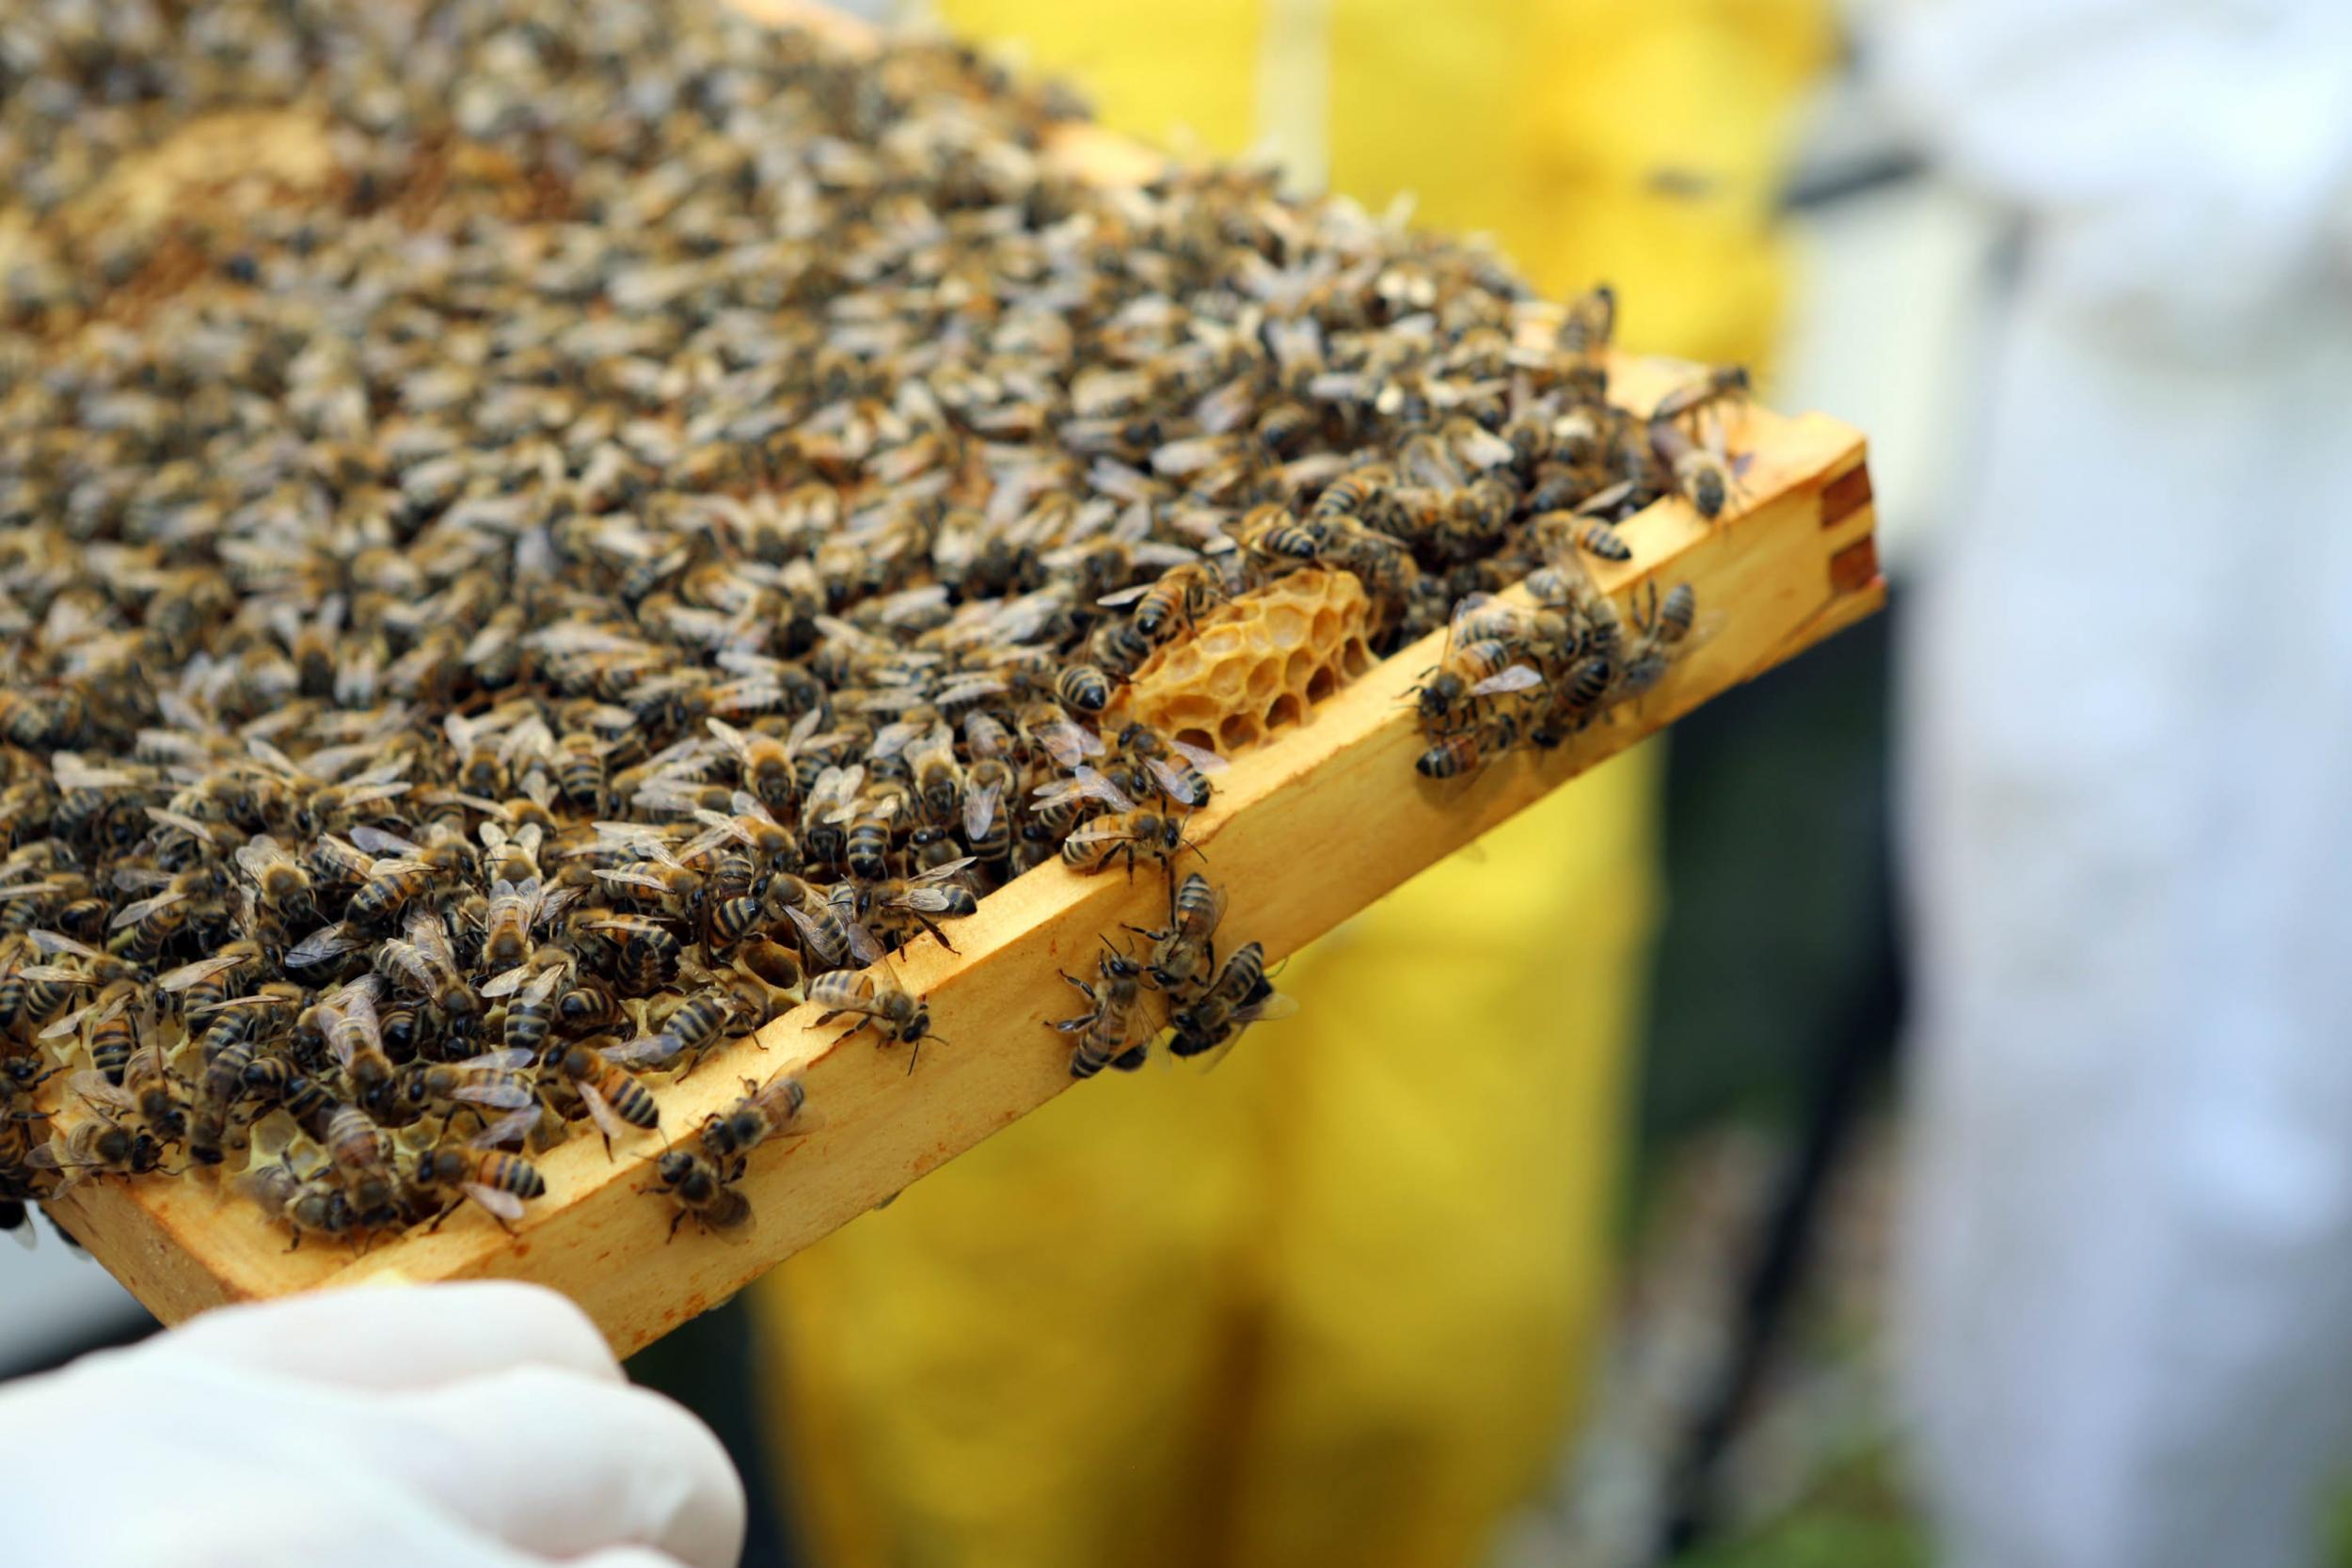 Bees are "small but immensely industrious creatures" according to Camilla Goddard